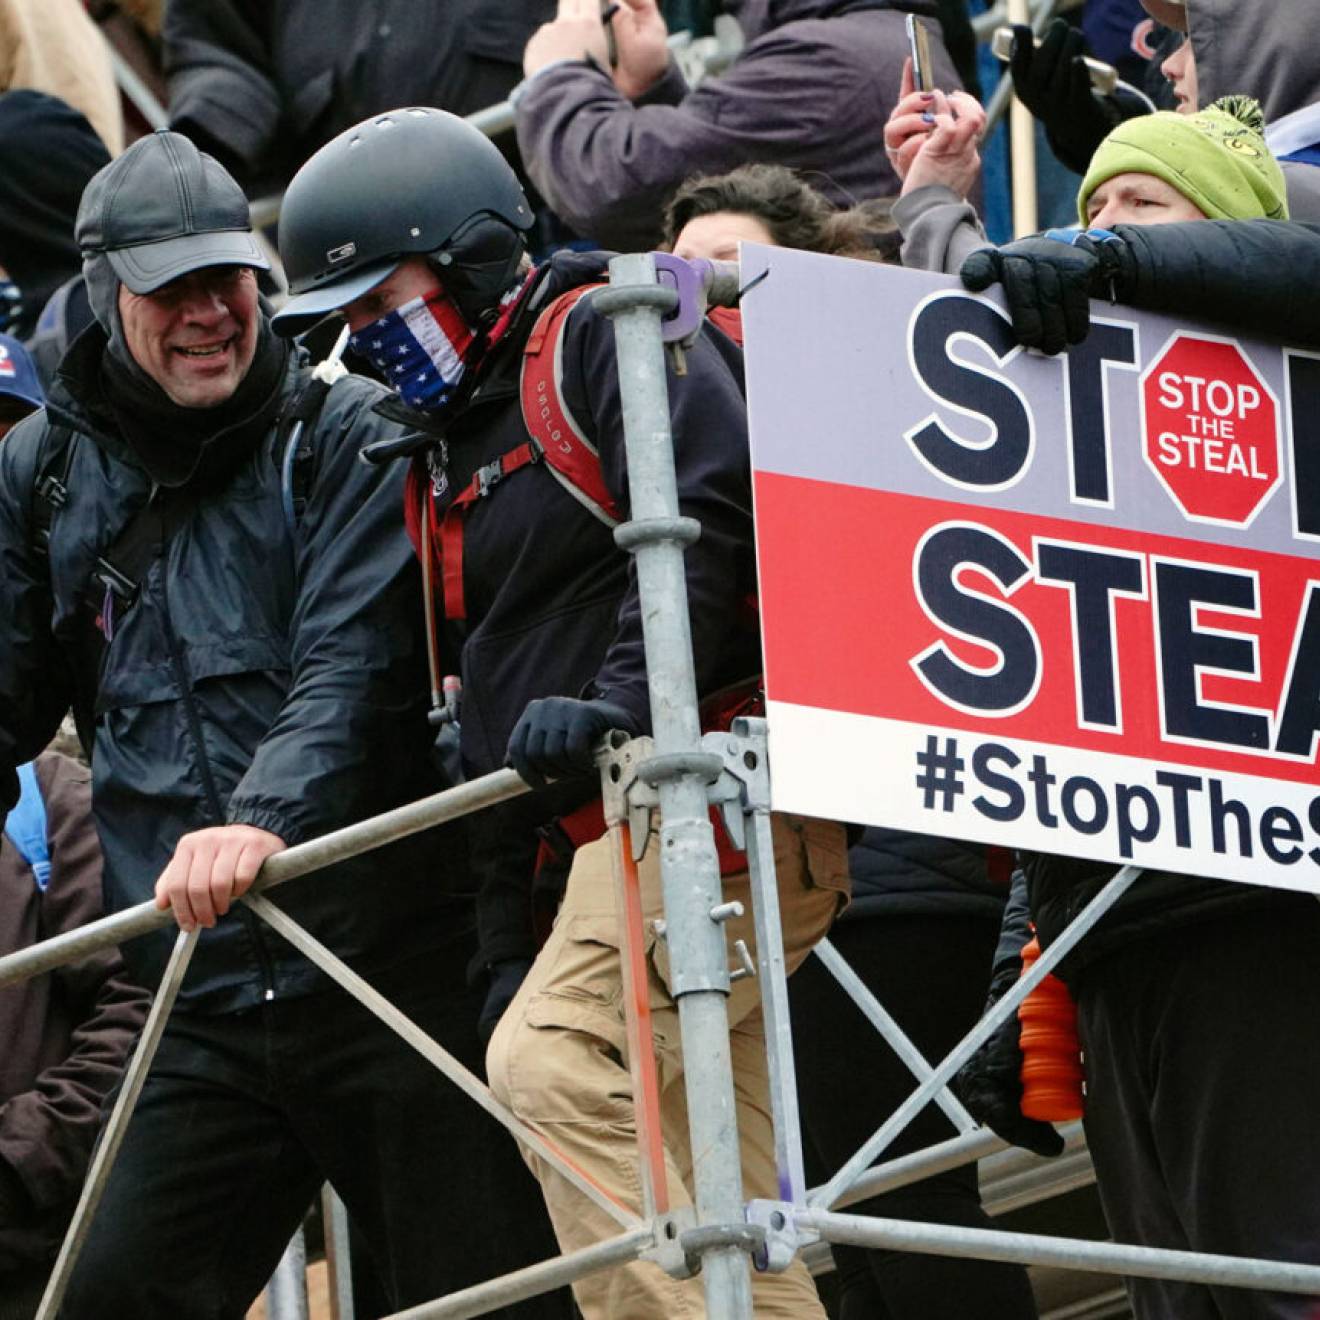 People wearing tactical gear attack the Capitol on Jan 6th, with a big sign reading "Stop the Steal"